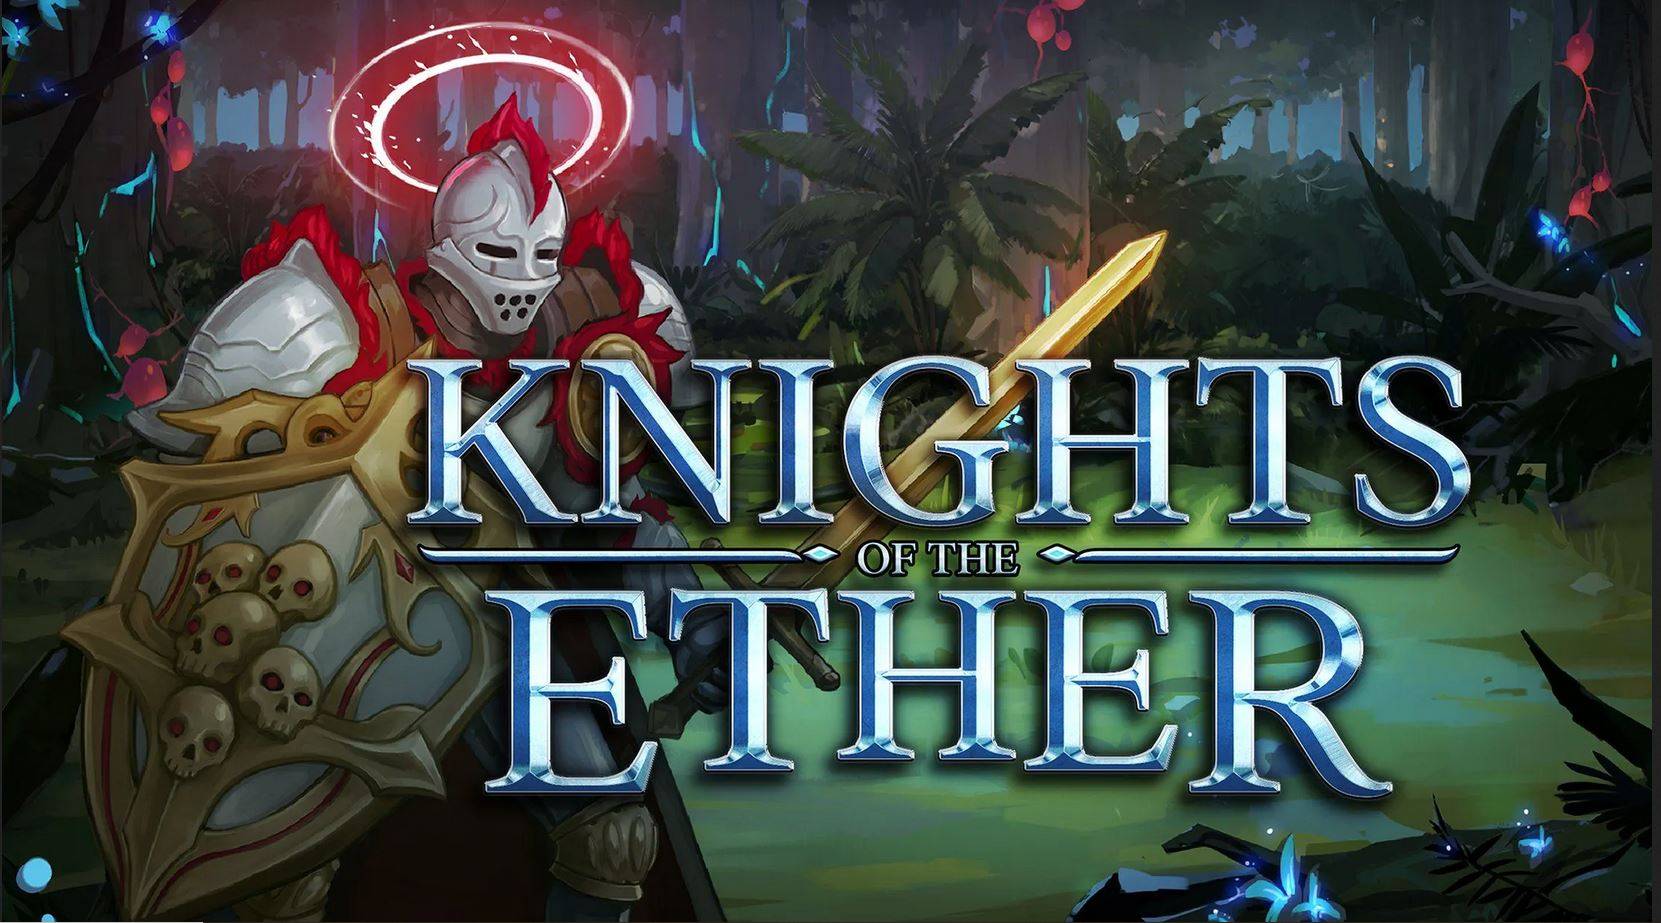 Knights of the Ether: Blightfell - Game Review